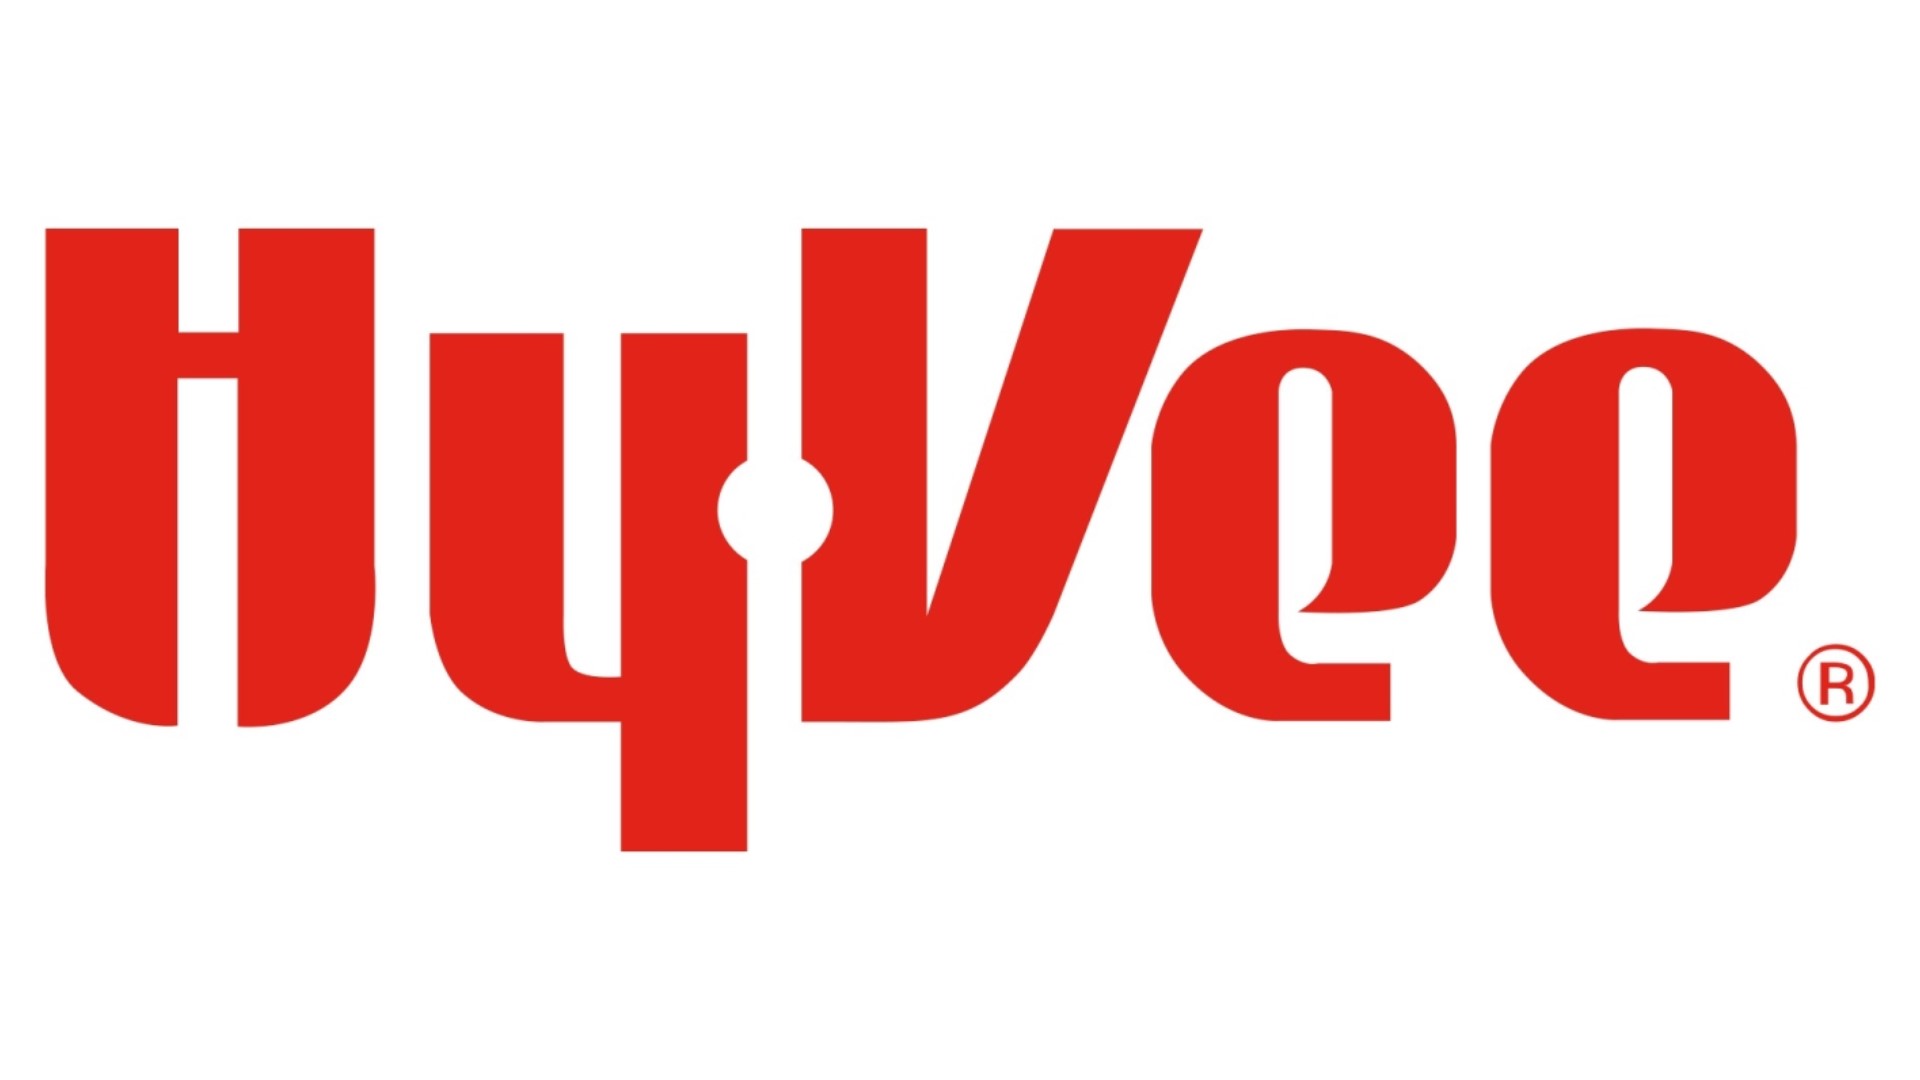 In a statement, a Hy-Vee spokesperson said in part, "As a company, Hy-Vee is always looking for innovative ways to improve the customer experience in our stores."